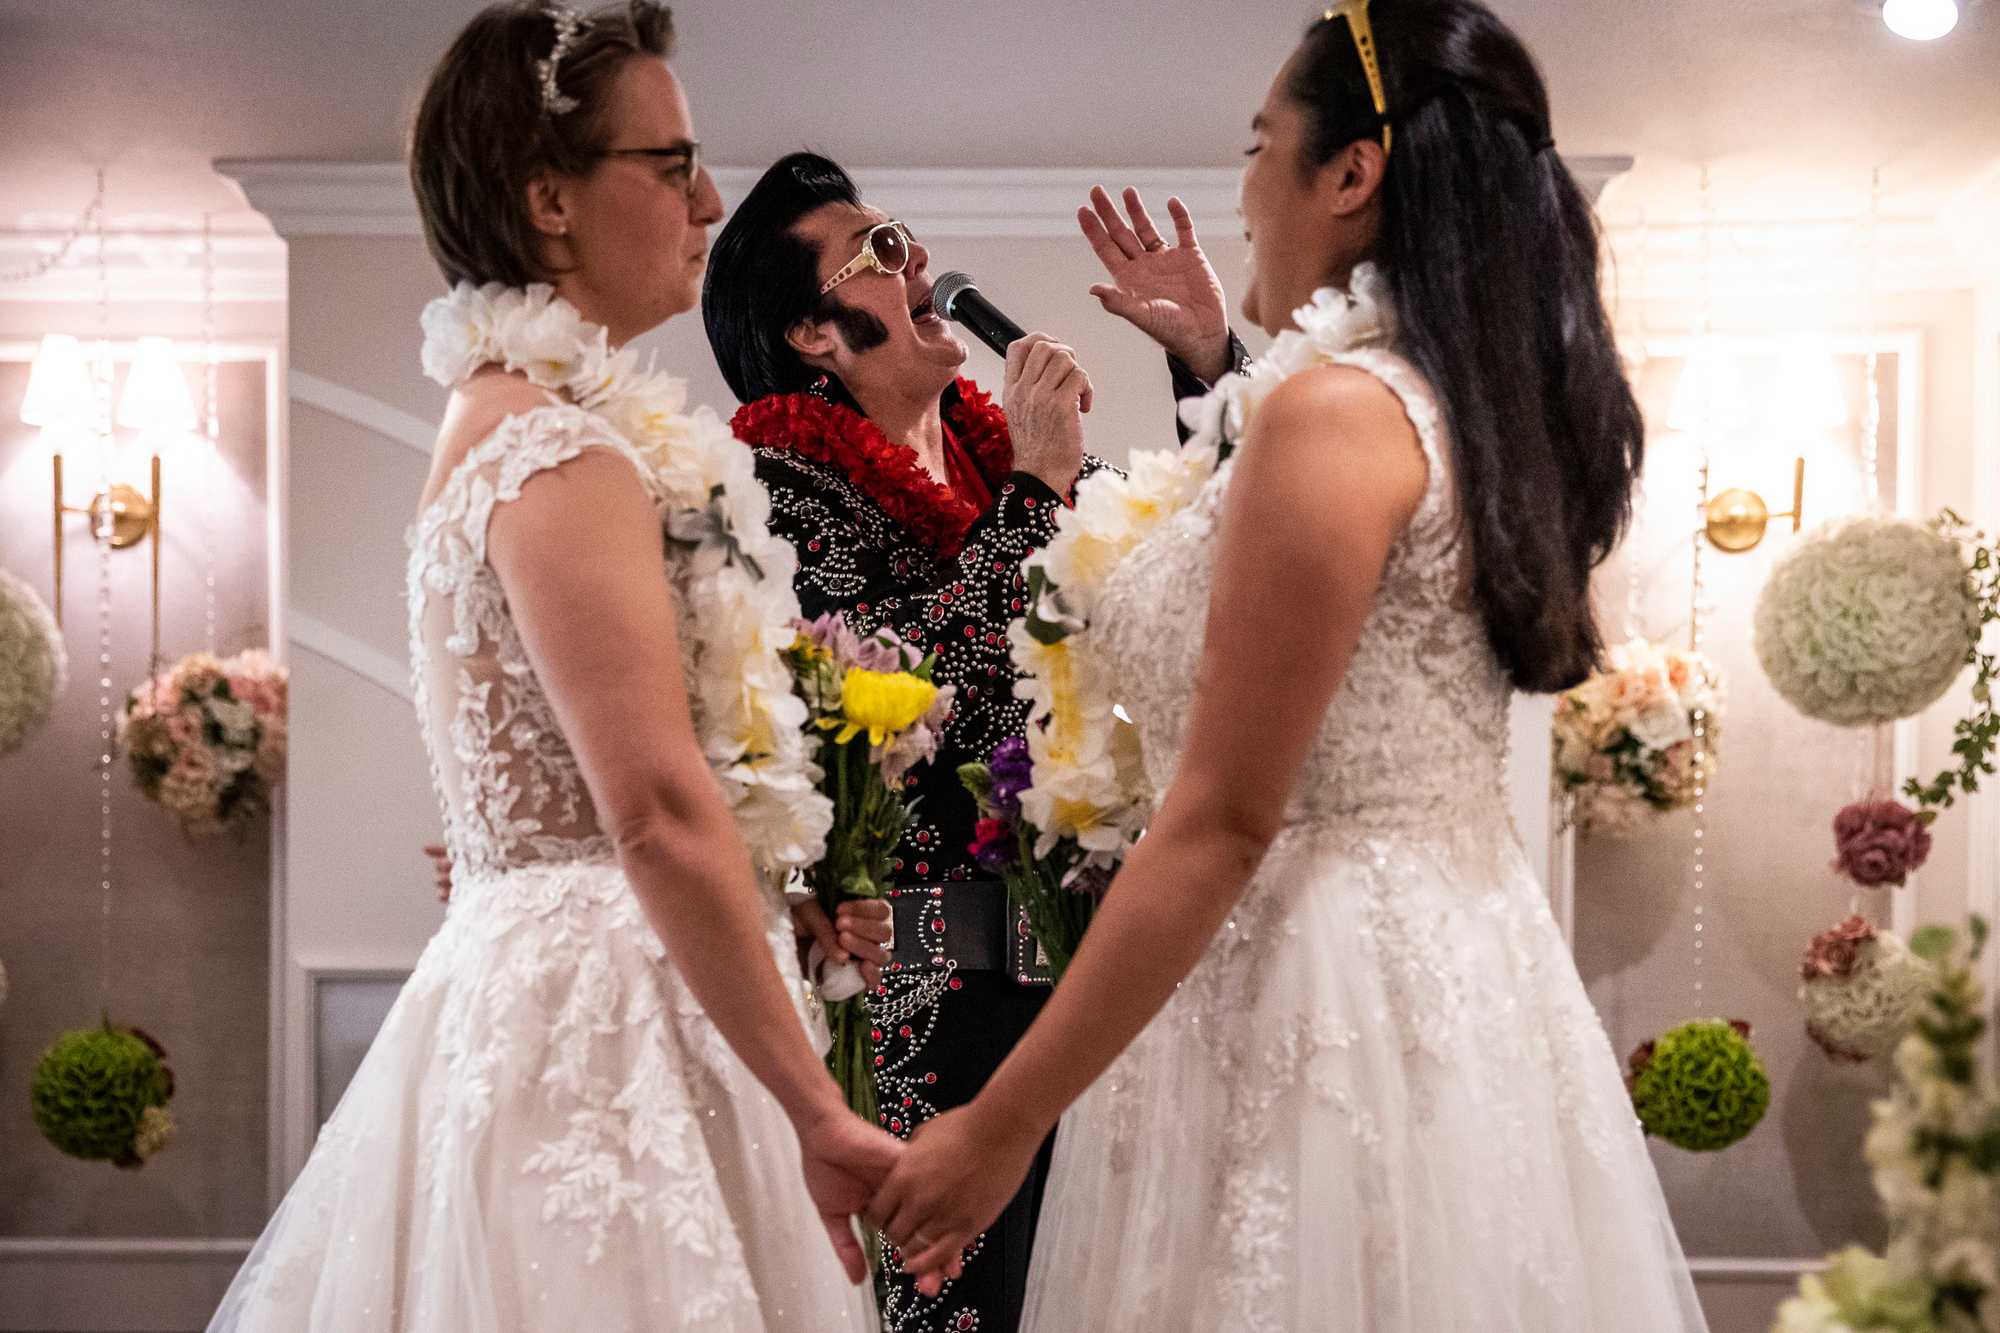 Brendan Paul, an Elvis impersonator at the Graceland Wedding Chapel in Las Vegas, sang for newlyweds Sarah and Stephanie Logia.  